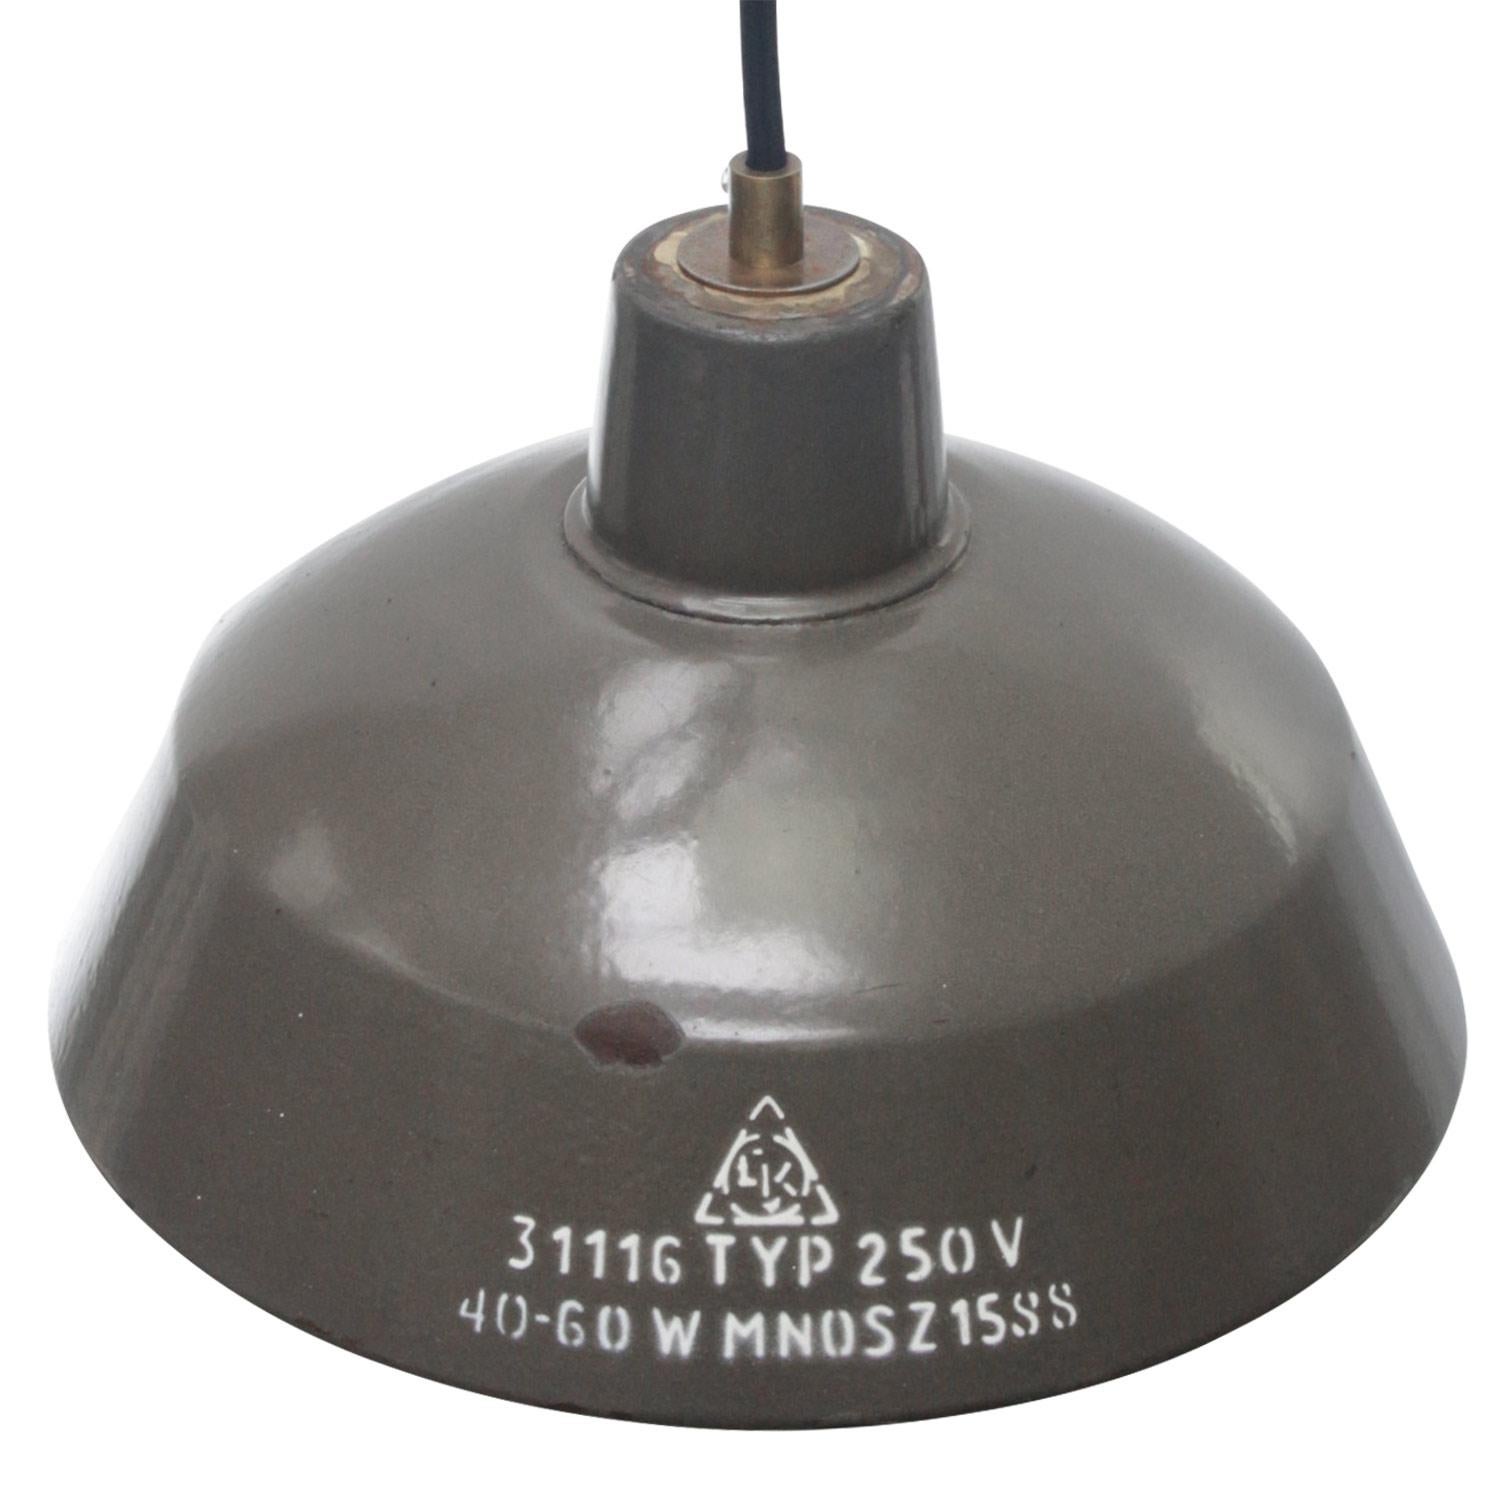 Small industrial pendant
Brown enamel white interior
2 meter black cotton wire

Weight: 1.00 kg / 2.2 lb

Priced per individual item. All lamps have been made suitable by international standards for incandescent light bulbs, energy-efficient